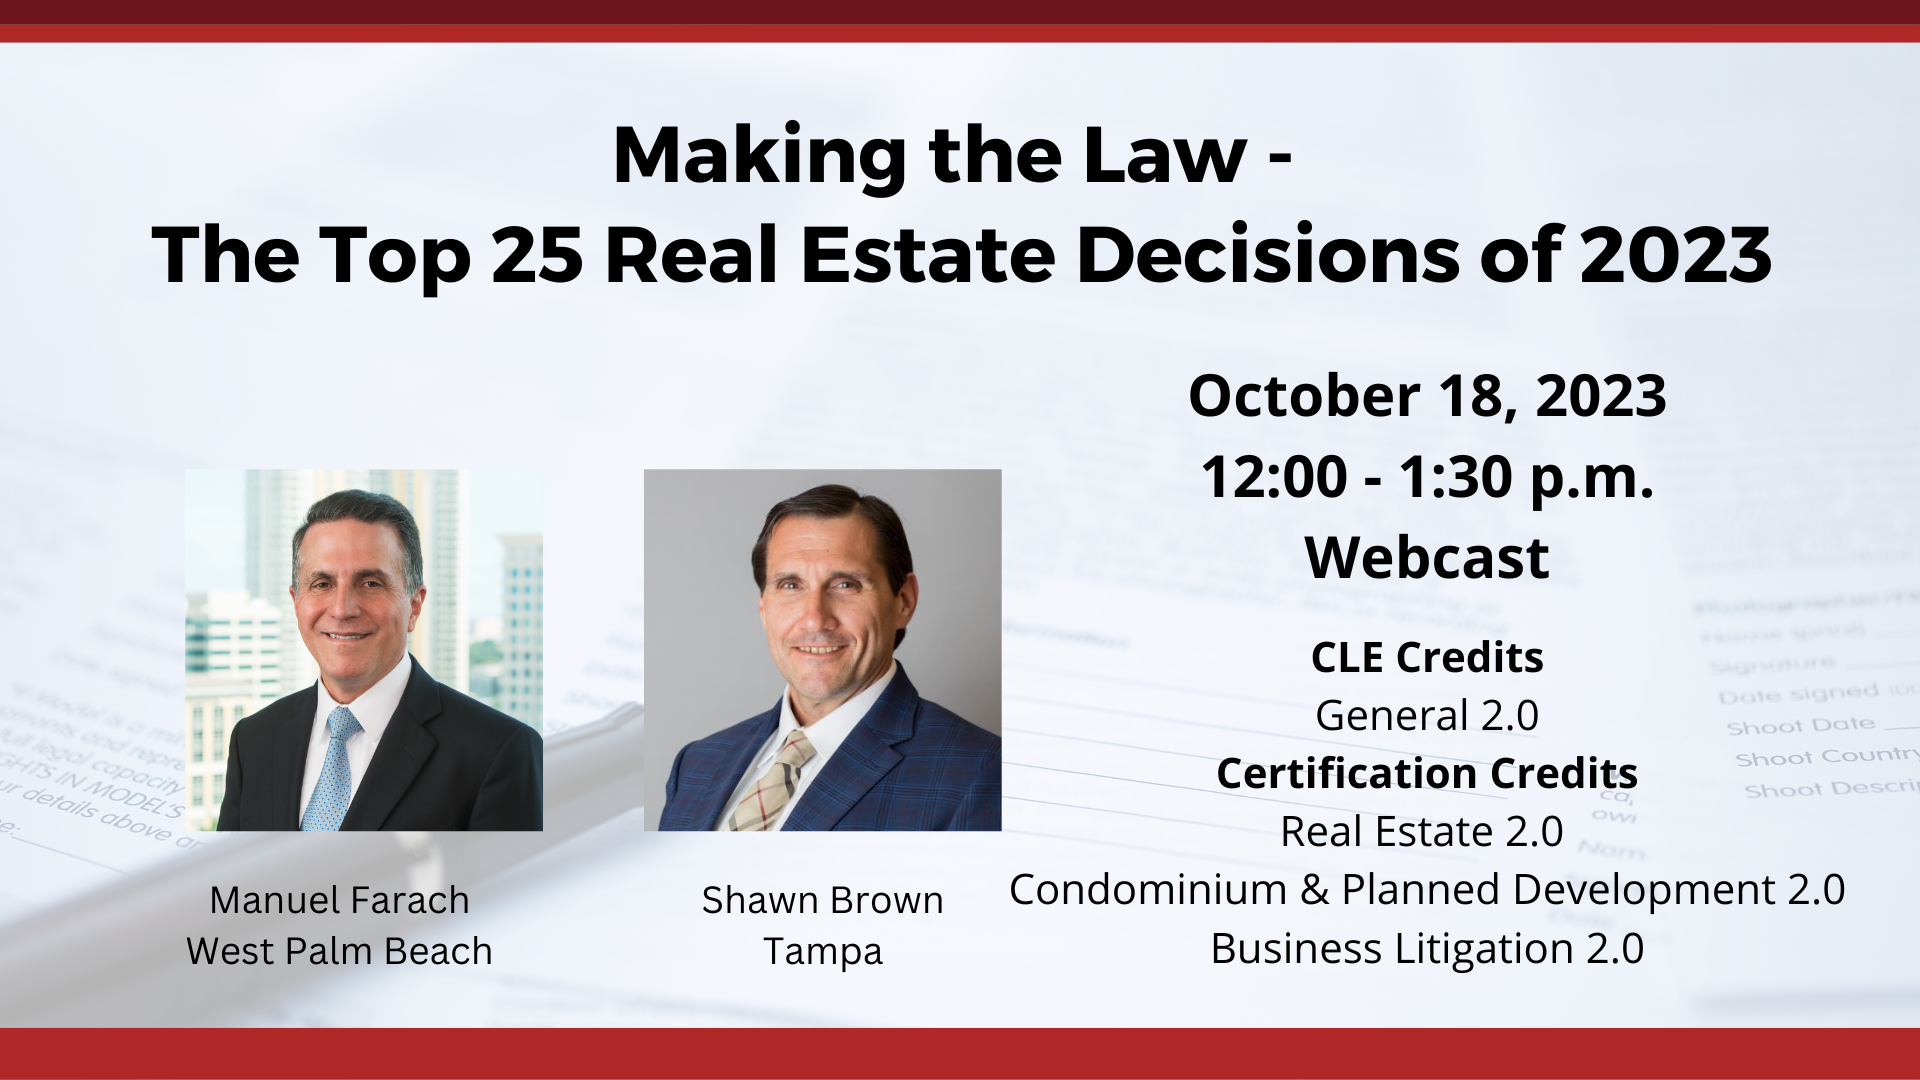 Making the Law - The Top 25 Real Estate Decisions of 2023